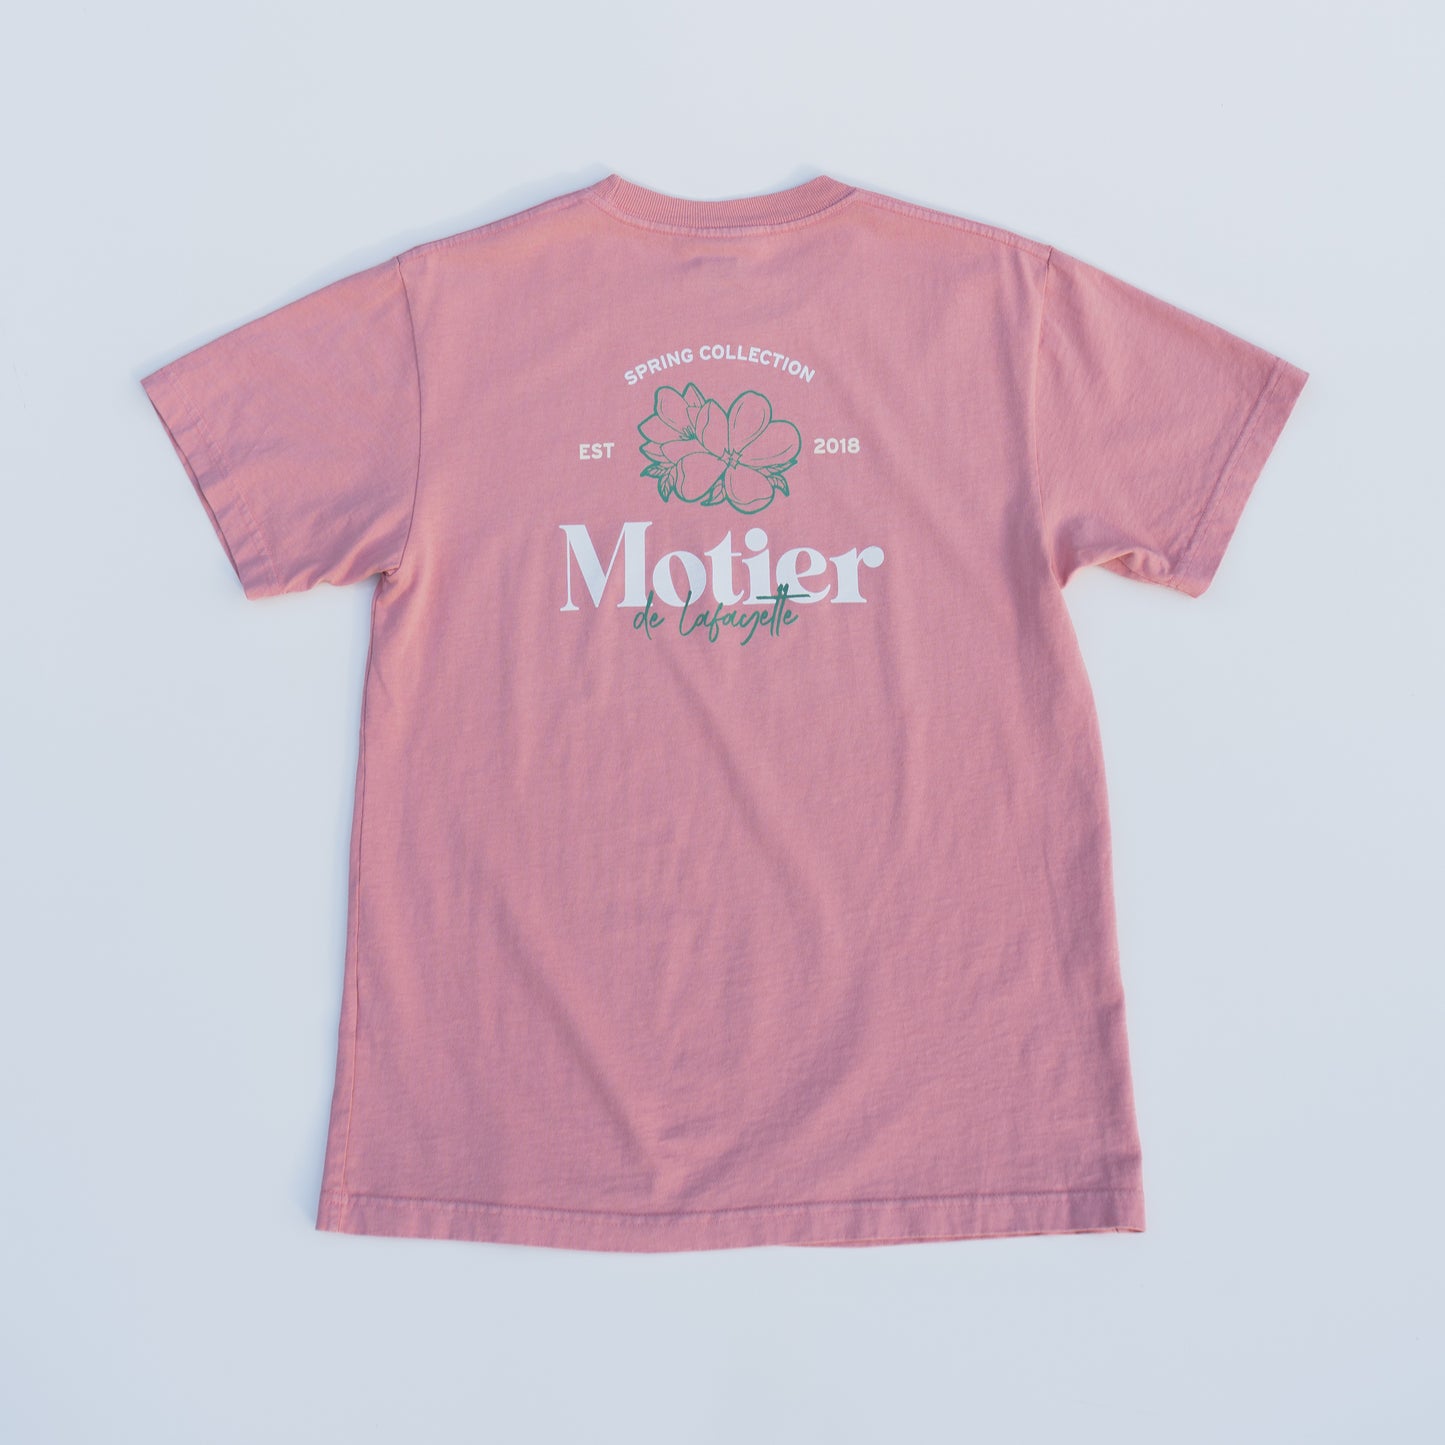 The 2023 Magnolia Luxe Tee (Coral)